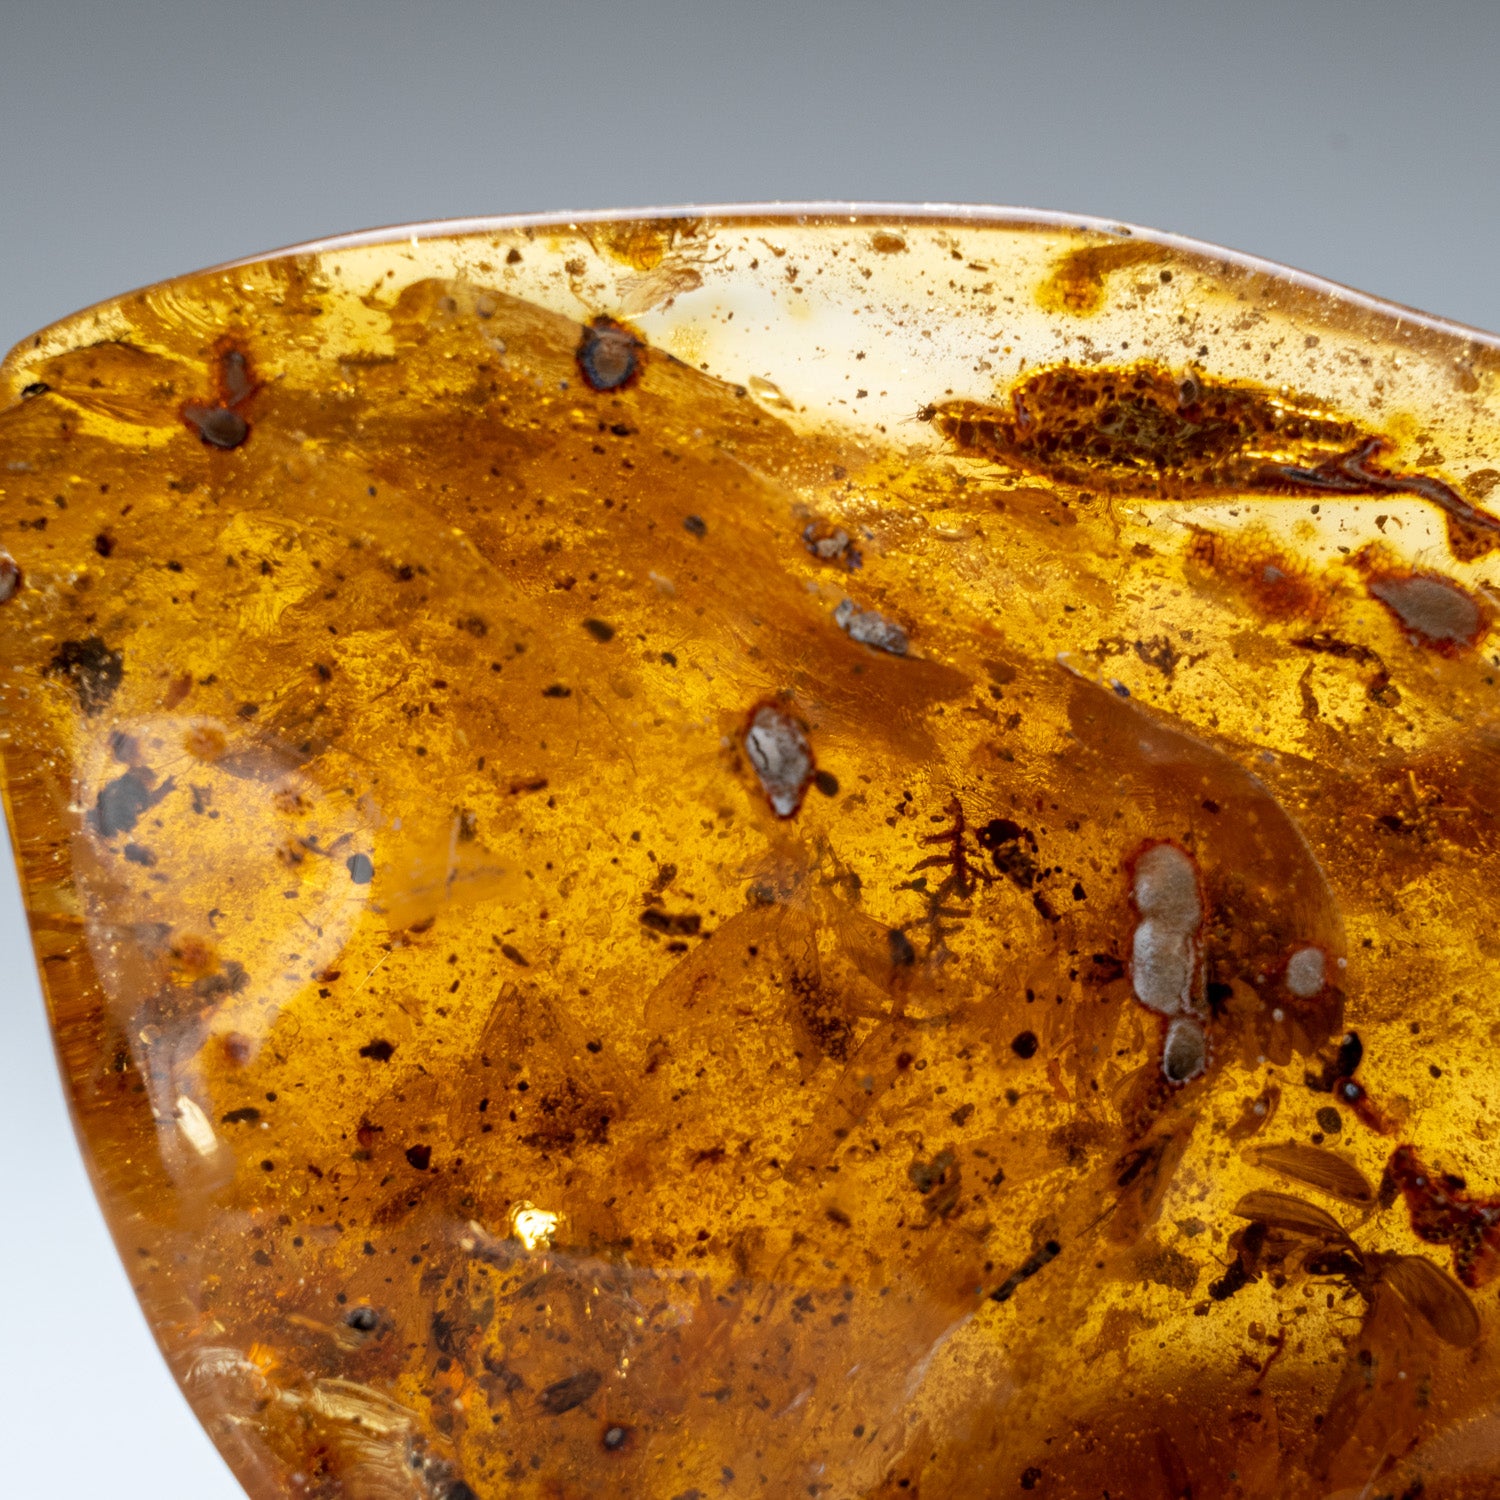 Amber from Baltic Sea, near Gdansk, Poland (303.6 grams)